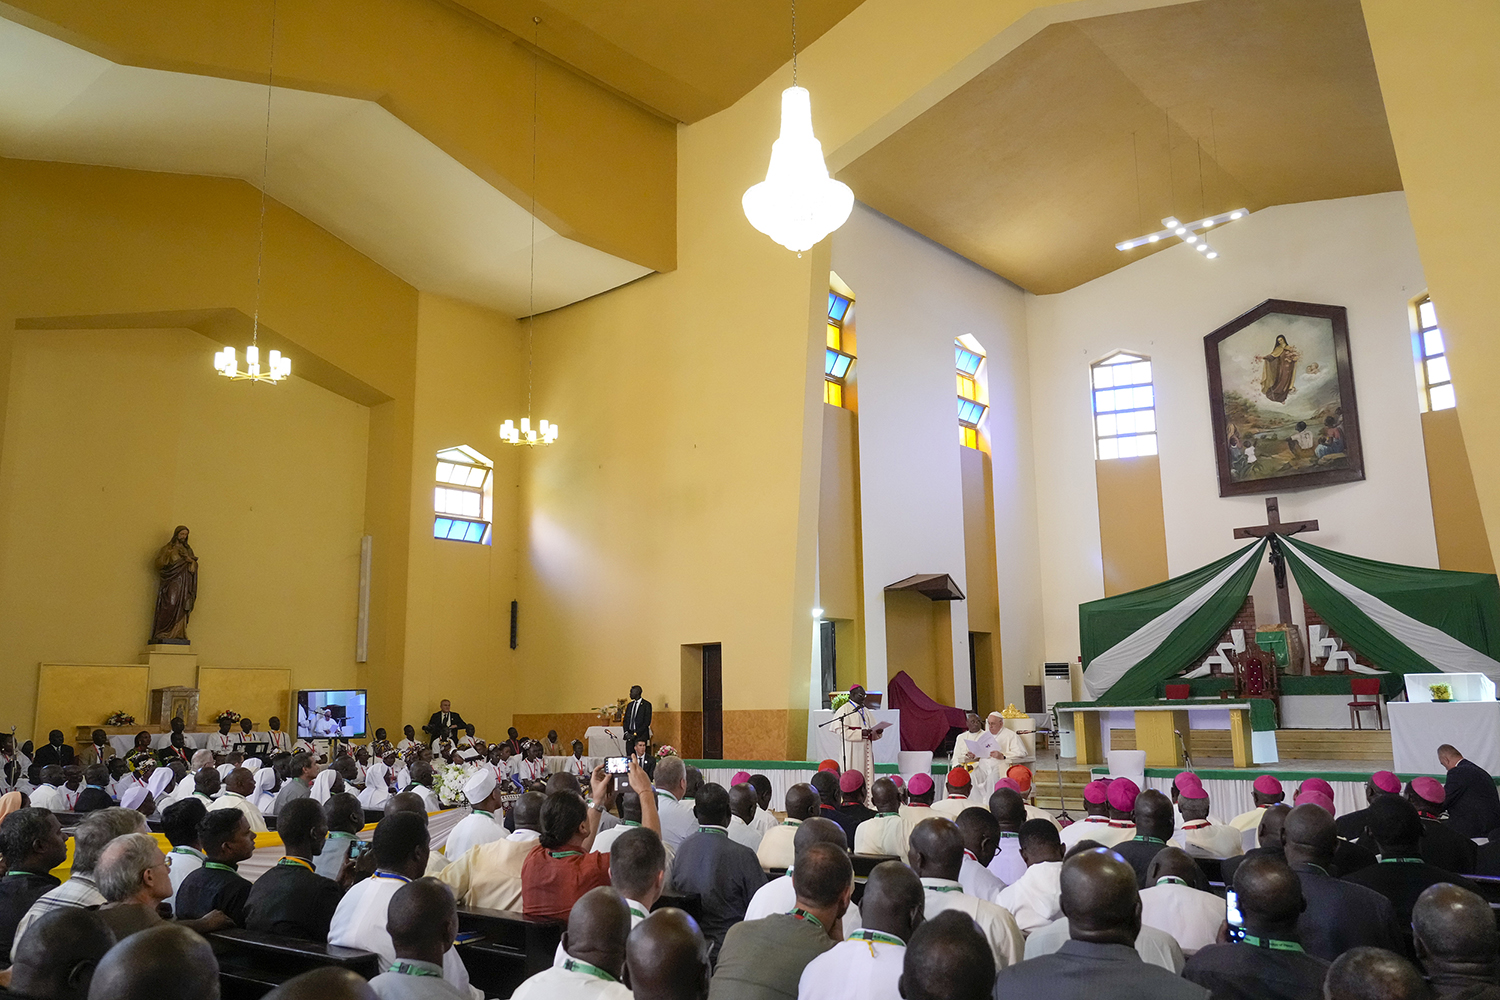 Pope Francis delivers his speech as he meets with priests, deacons, consecrated people and seminarians at the Cathedral of Saint Theresa in Juba, South Sudan, Saturday, Feb. 4, 2023. Francis is in South Sudan on the second leg of a six-day trip that started in Congo, hoping to bring comfort and encouragement to two countries that have been riven by poverty, conflicts and what he calls a "colonialist mentality" that has exploited Africa for centuries. (AP Photo/Gregorio Borgia)